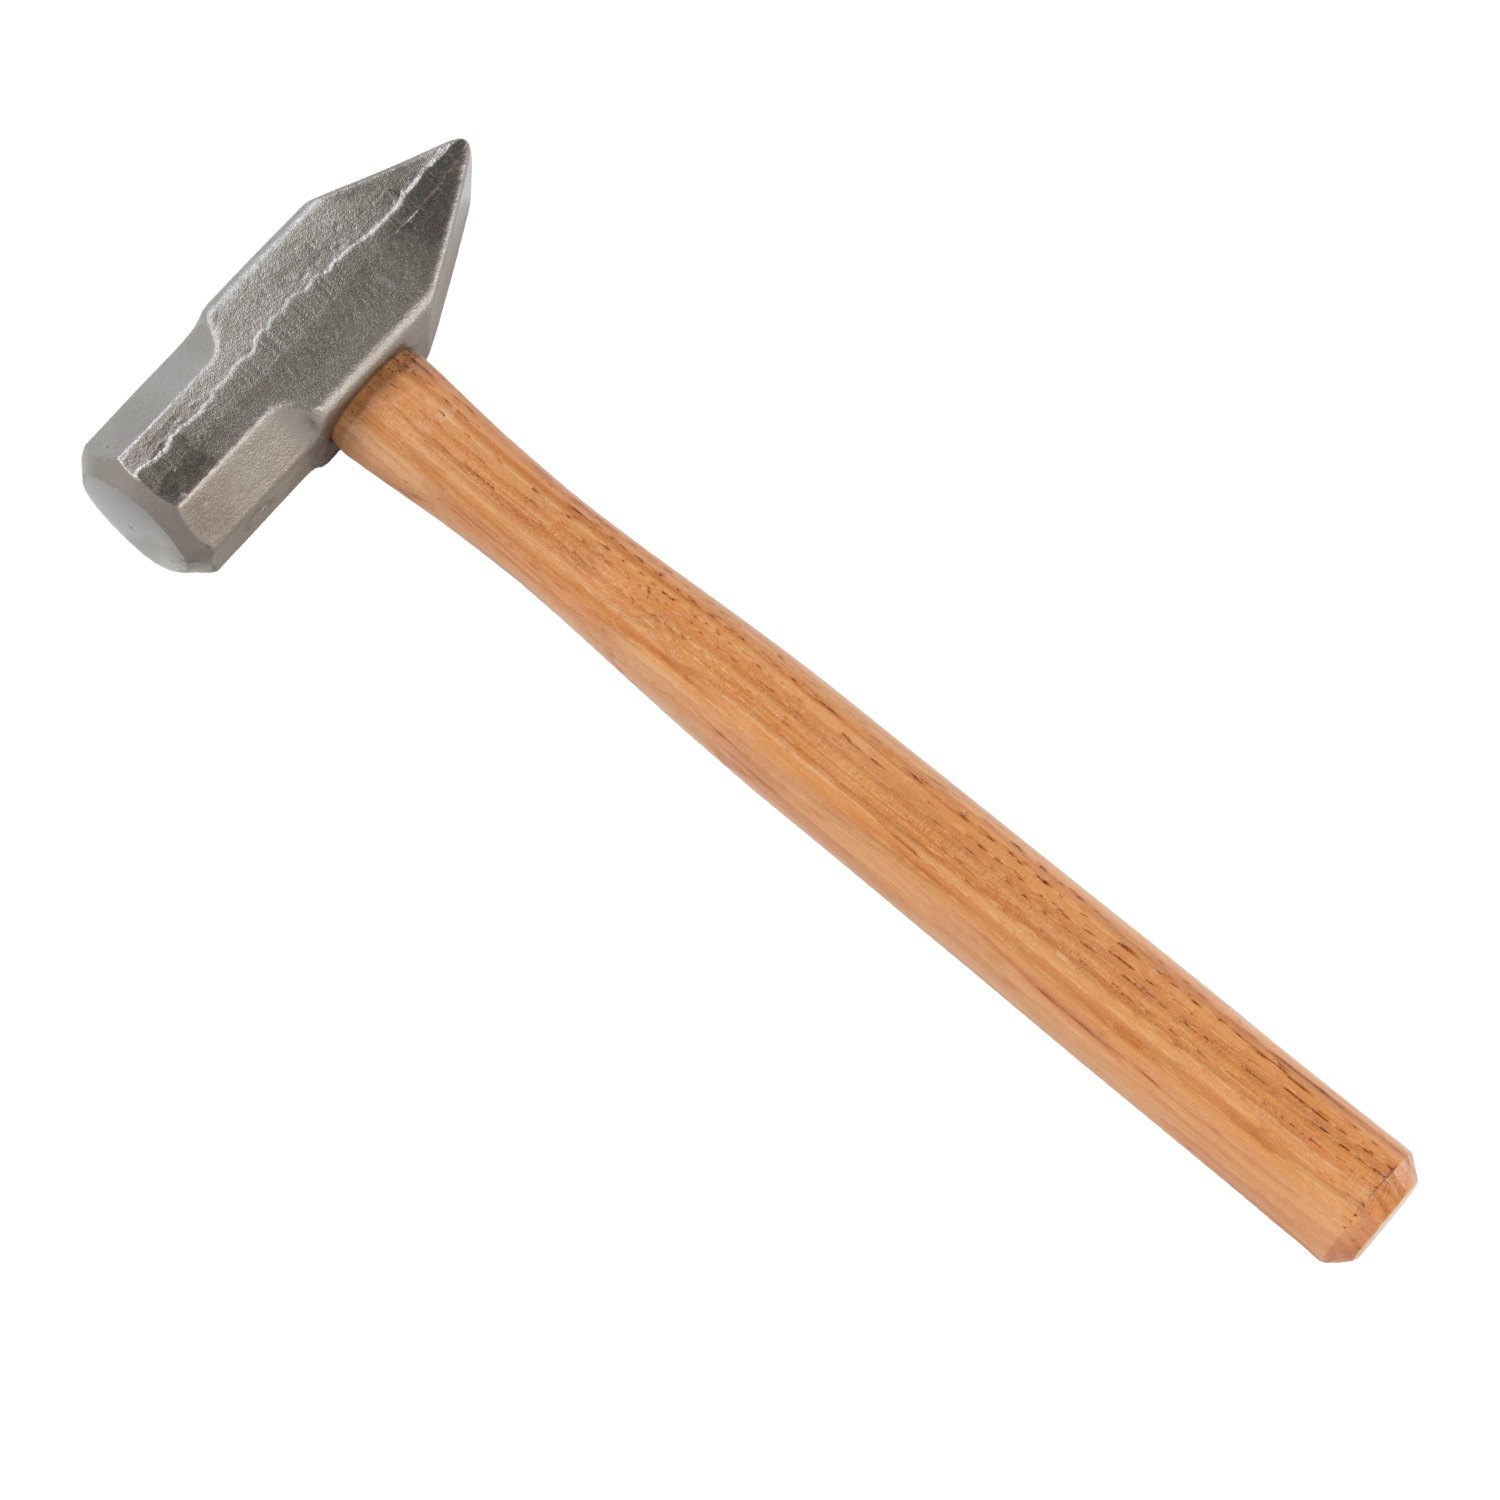 4 lbs. Cross Pein Hammer; 15 in. Wooden Handle – Council Tool